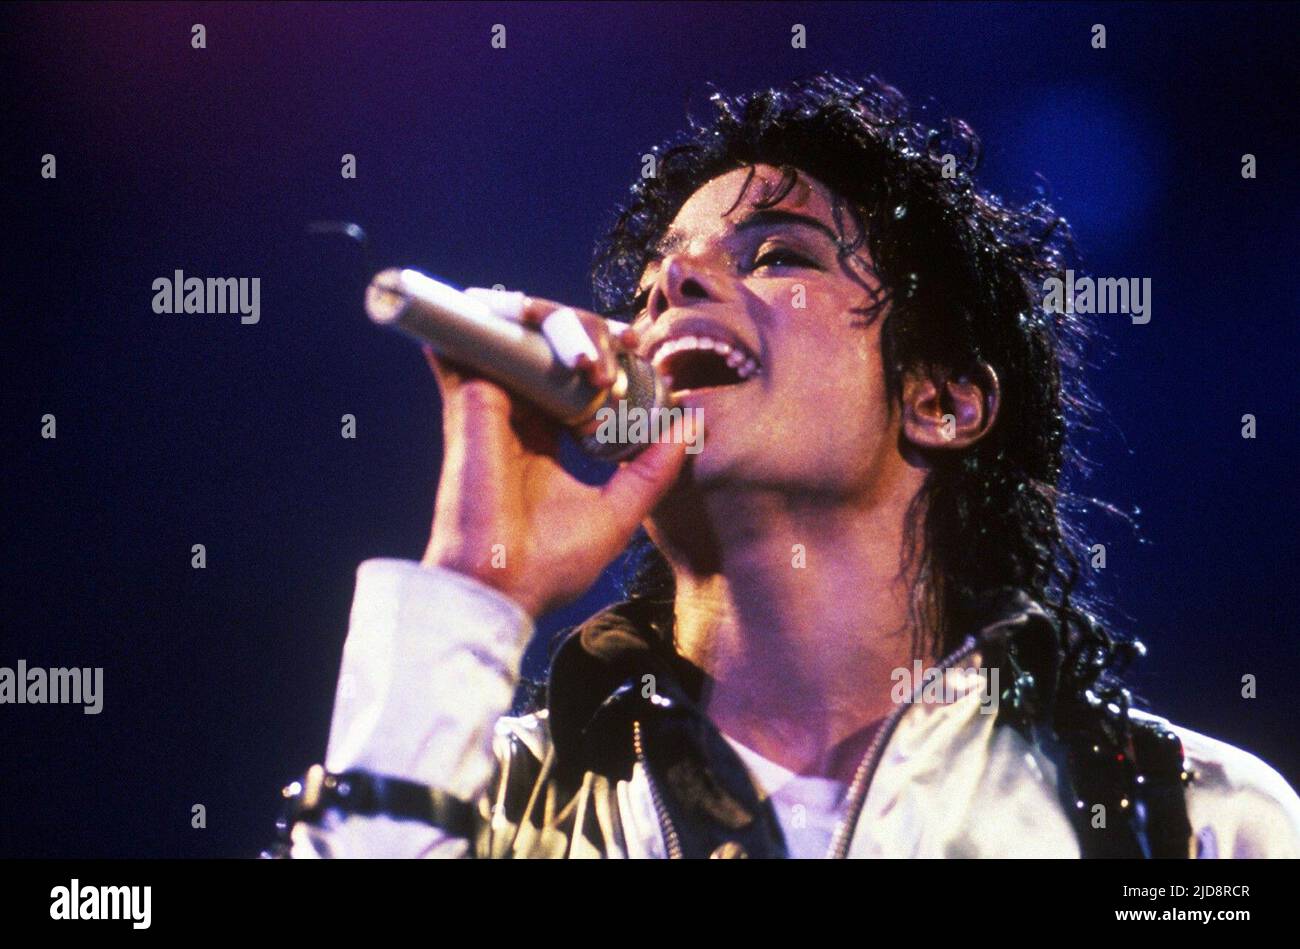 MICHAEL JACKSON, MICHAEL JACKSON: THE INSIDE STORY - WHAT KILLED THE KING OF POP?, 2010, Stock Photo